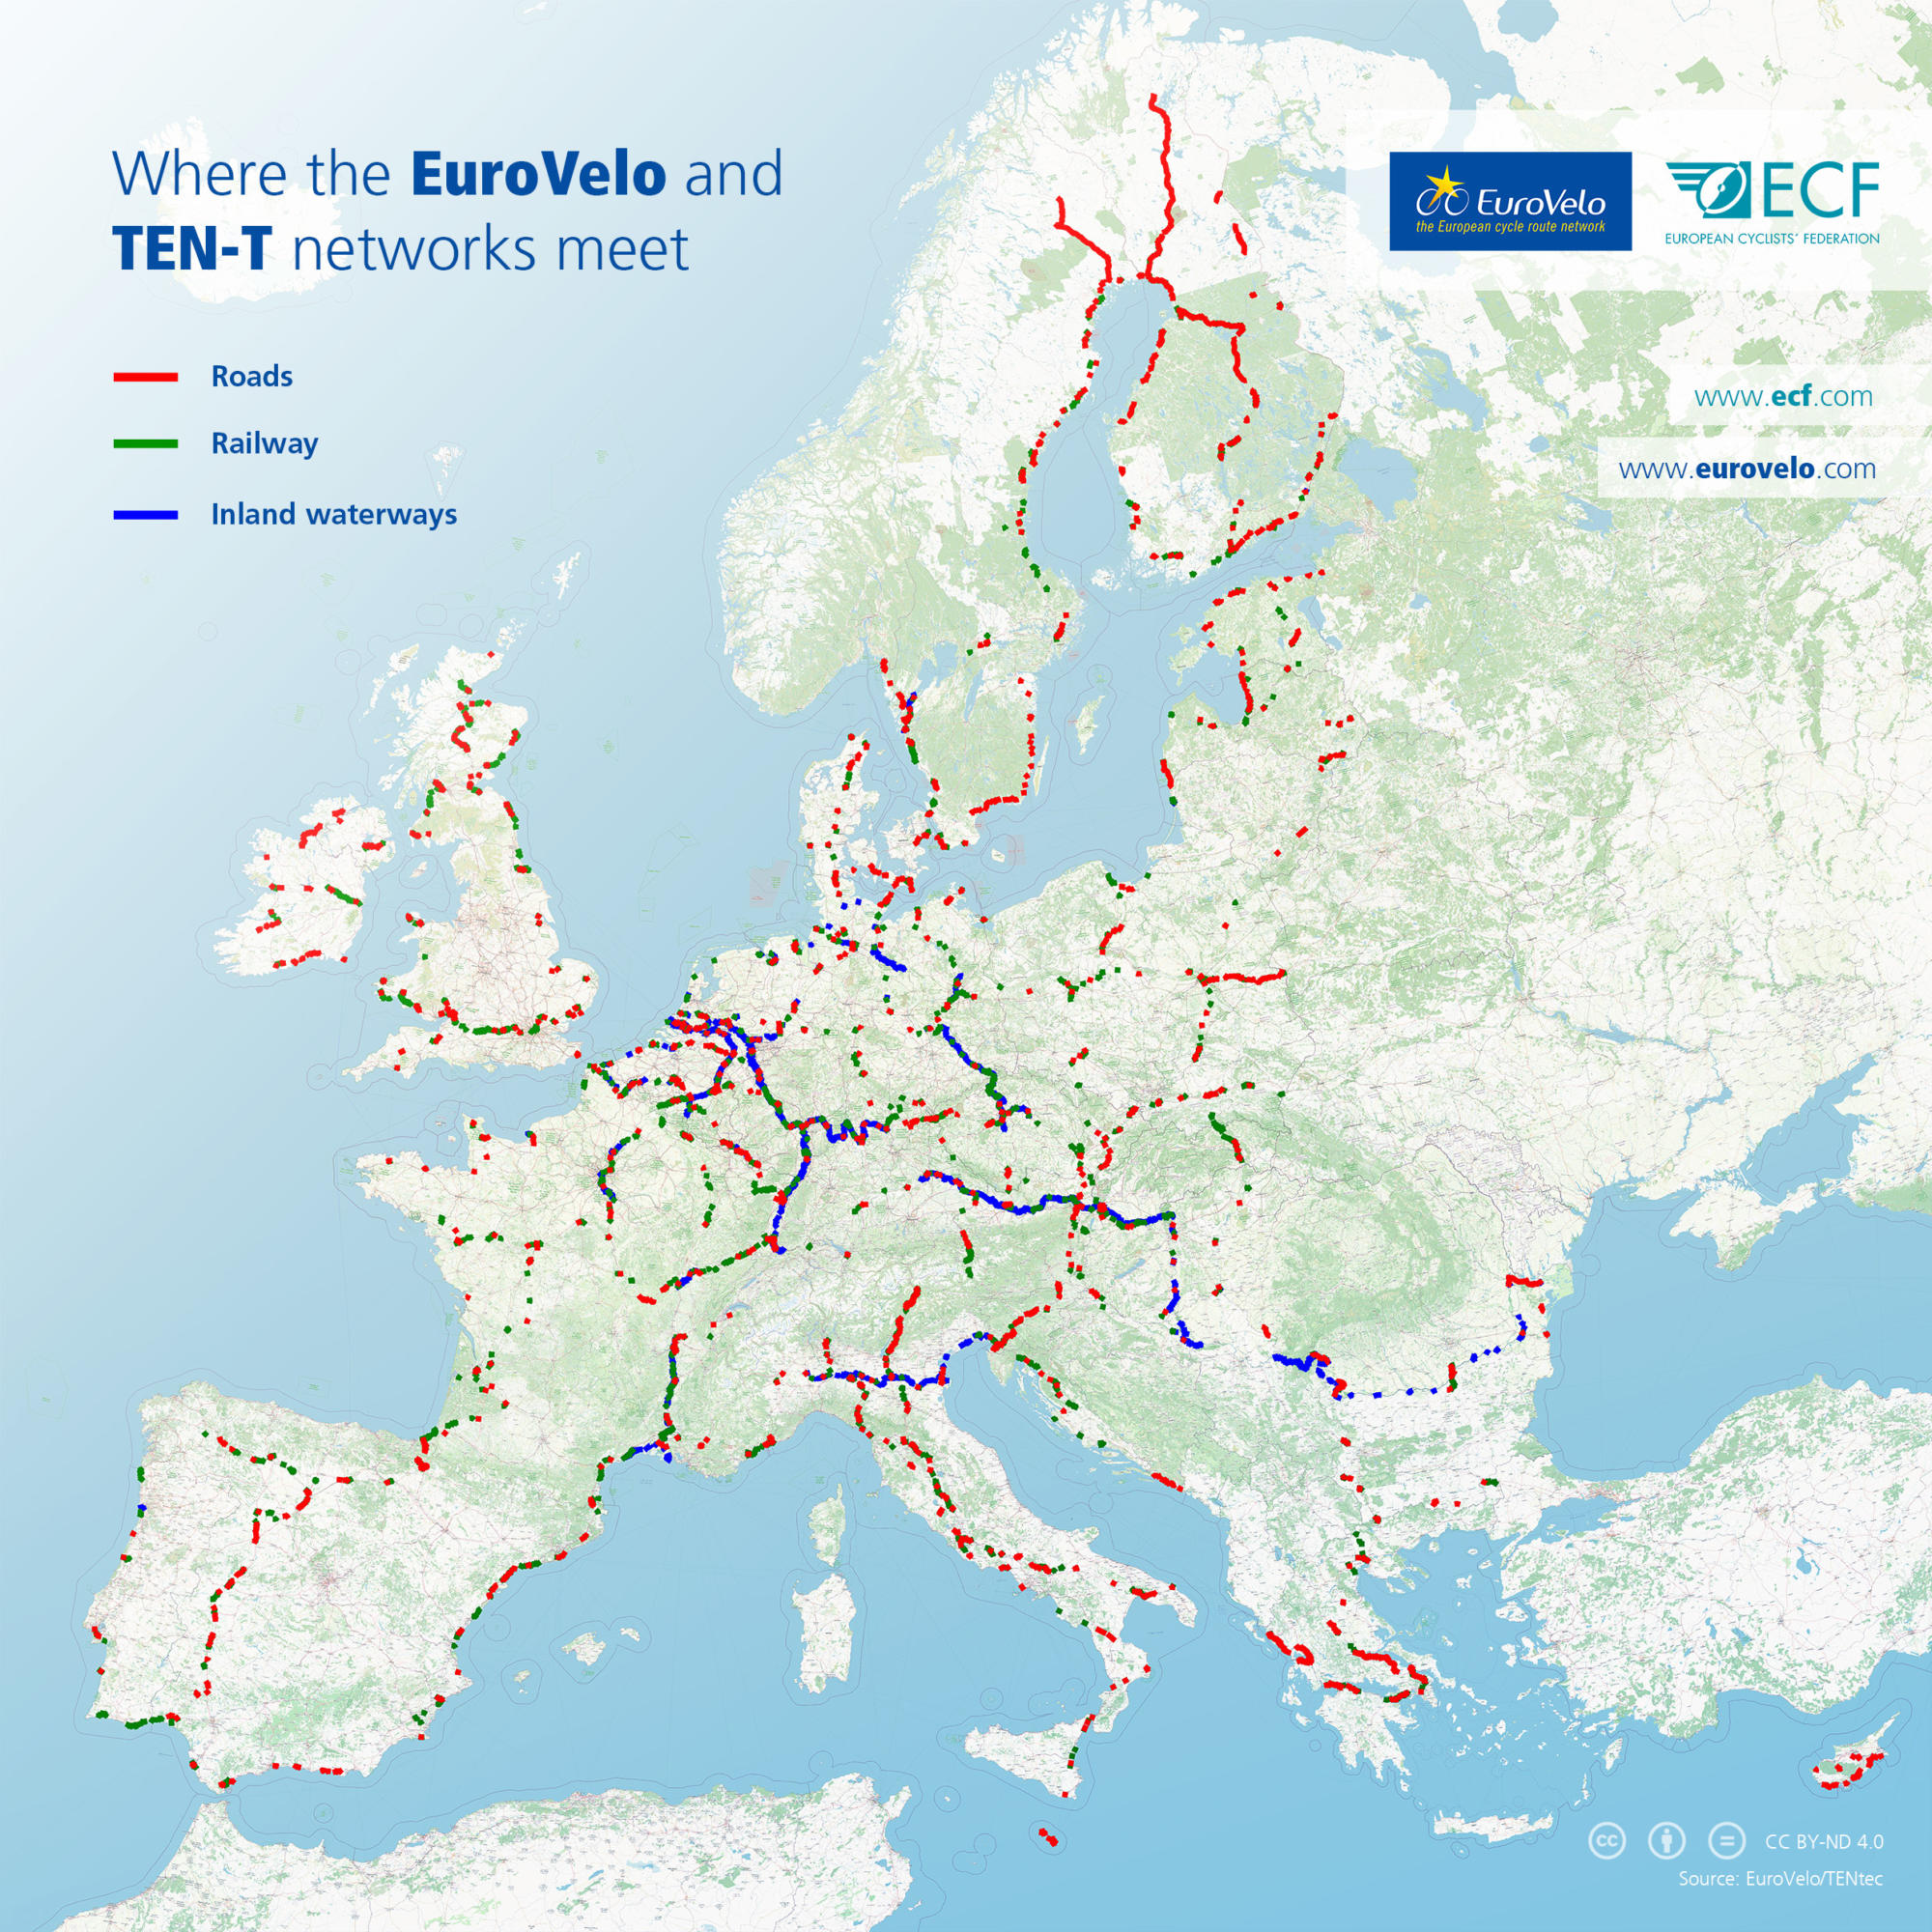 There are nearly 8000 locations where EuroVelo and TEN-T networks overlap. The number would be much higher if we included national and local cycling networks.  